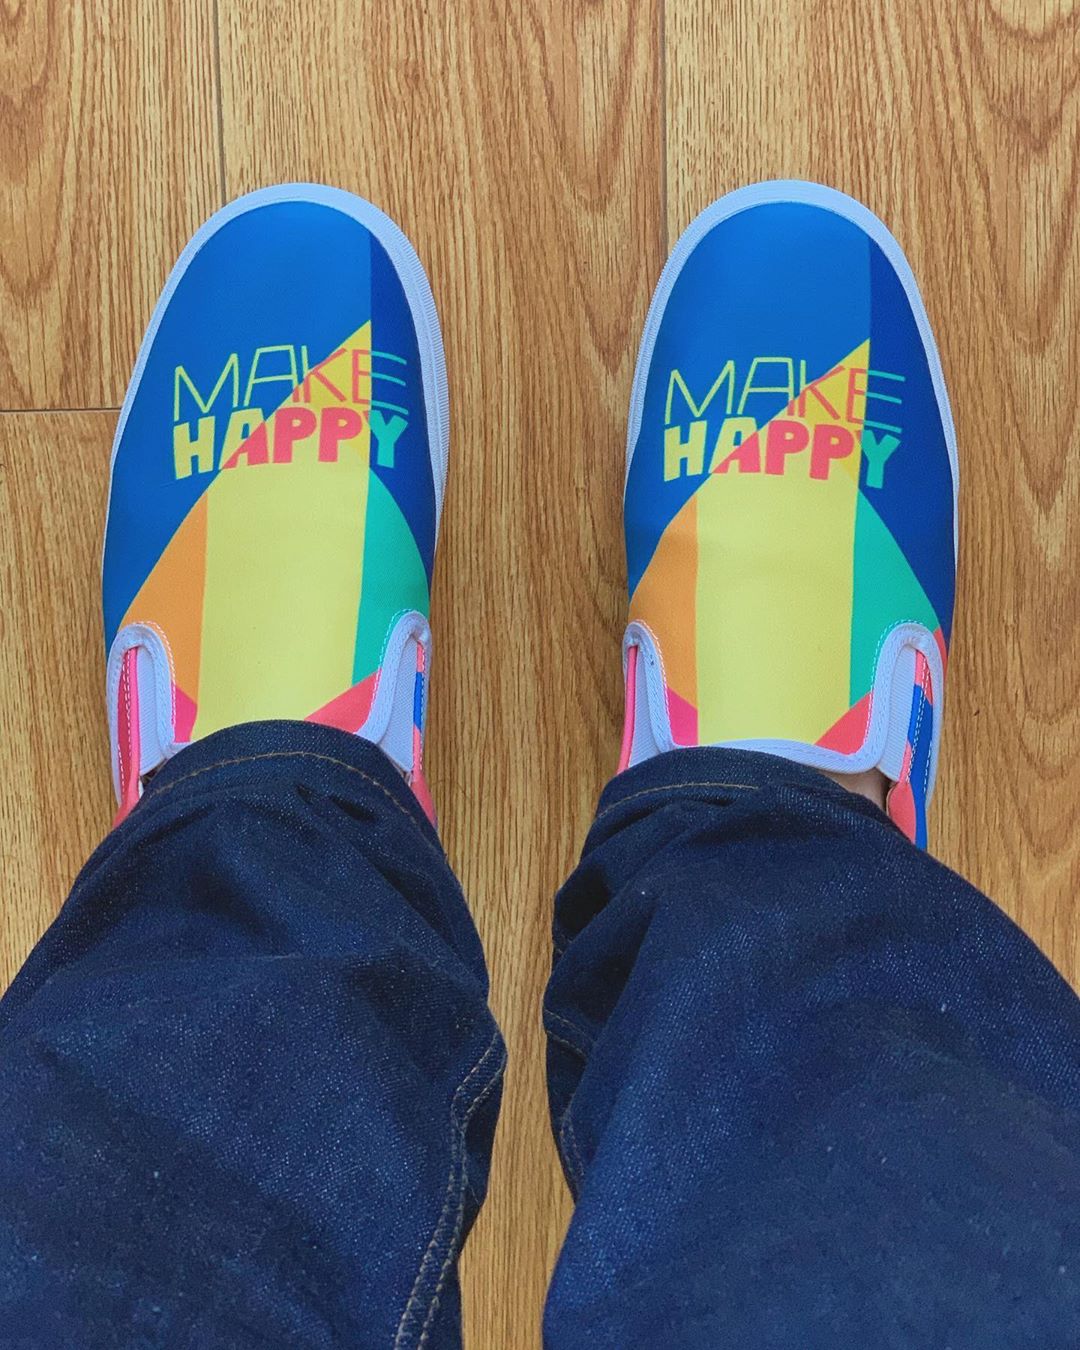 Stoked to receive my pair of Make Happy shoes from @awonderfulshop! These shoes are made...